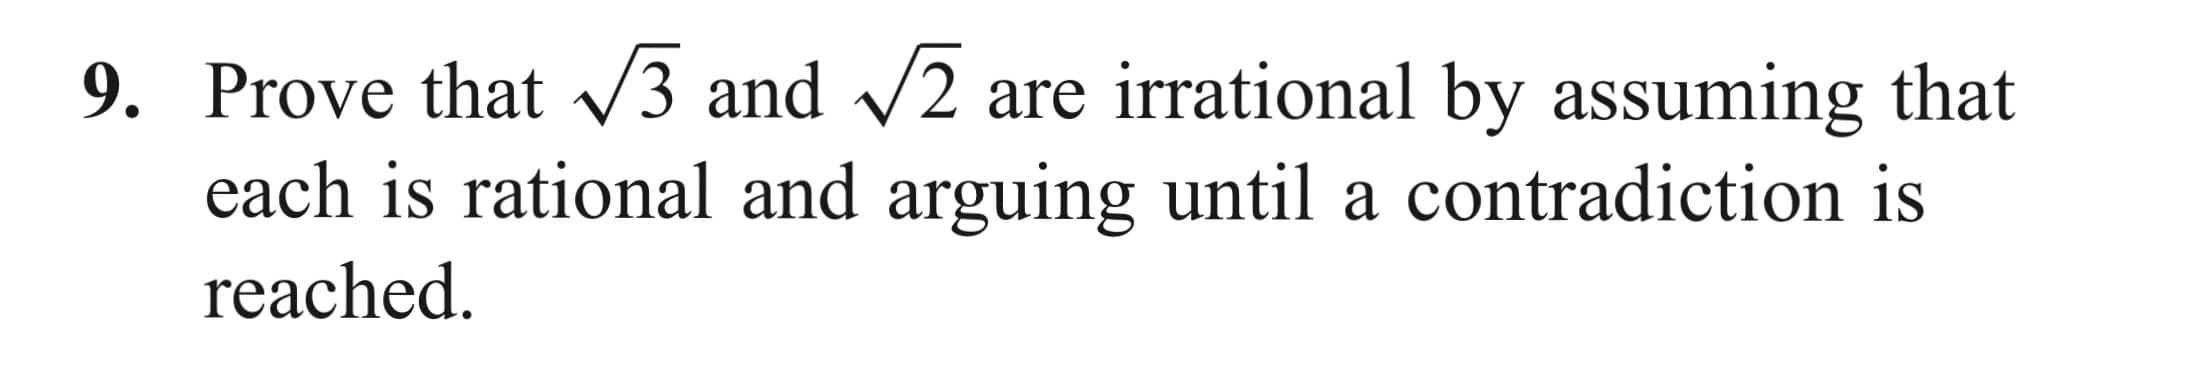 9. Prove that V3 and /2 are irrational by assuming that
each is rational and arguing until a contradiction is
reached.
